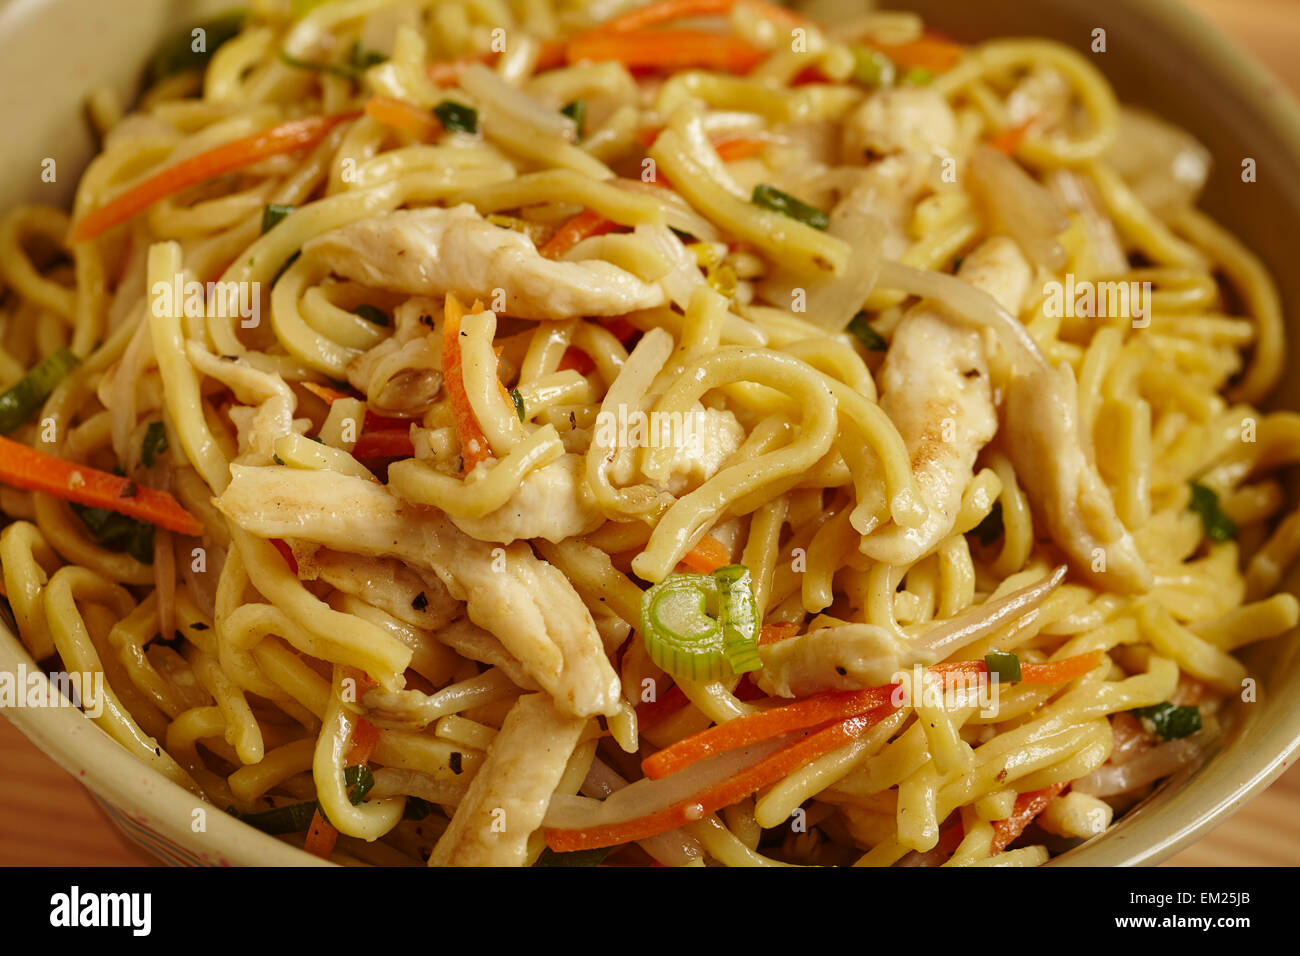 Hakka Fried Noodles with chicken, Indian/Chinese style (sometimes called 'Hakka' style) lo mein. Stock Photo